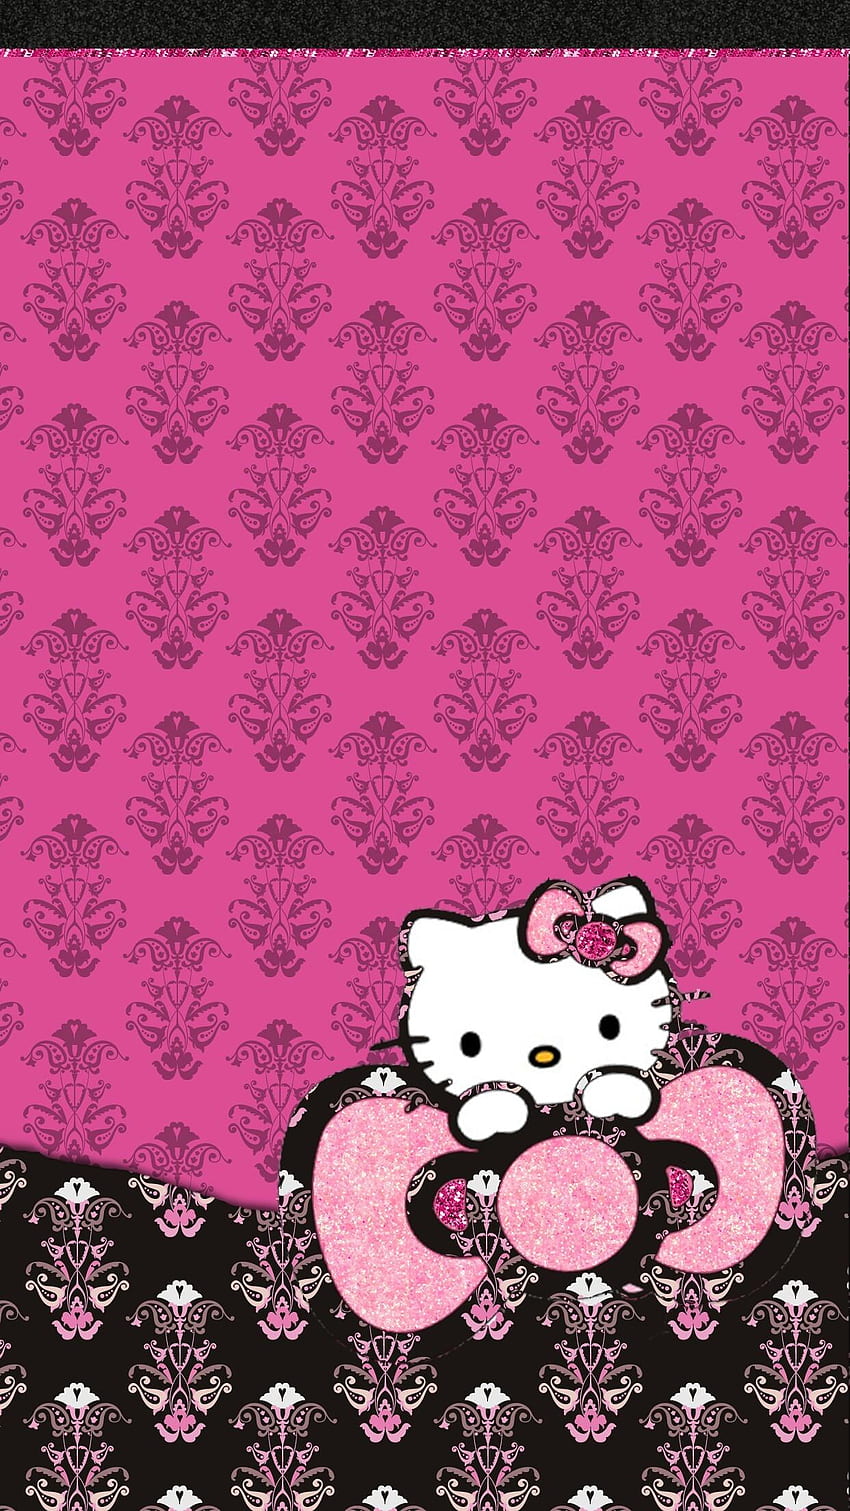 25 Hello Kitty Wallpapers To Add A Delight Touch To Your Devices  Good  Night Black Wallpaper  Idea Wallpapers  iPhone WallpapersColor Schemes